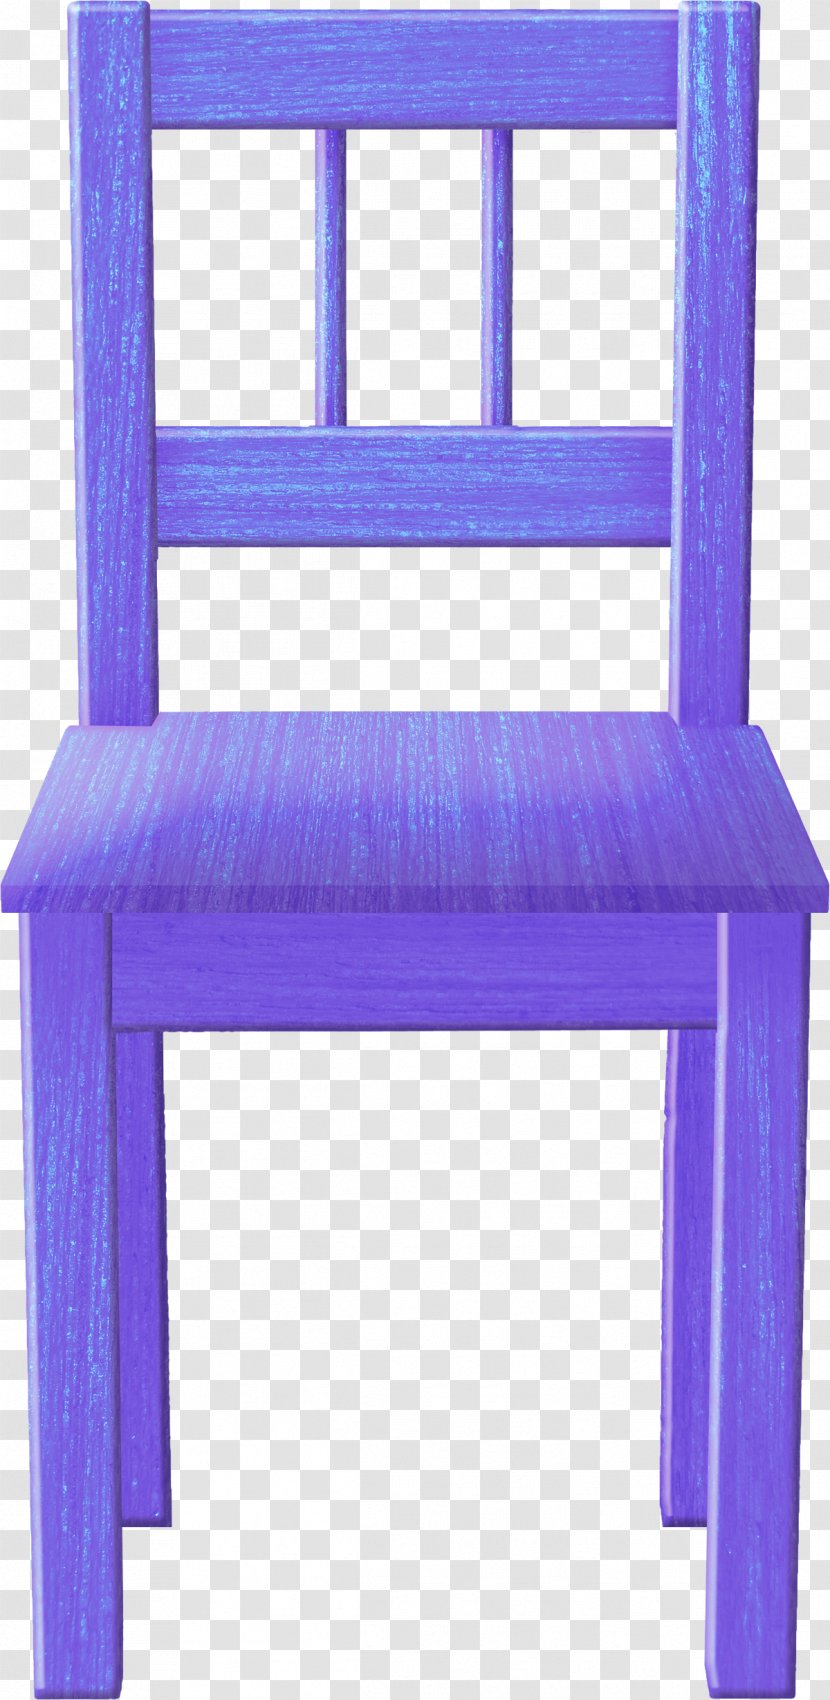 Table Chair Bench Garden Furniture - Outdoor - Blue Hand-painted Material Free To Pull Transparent PNG